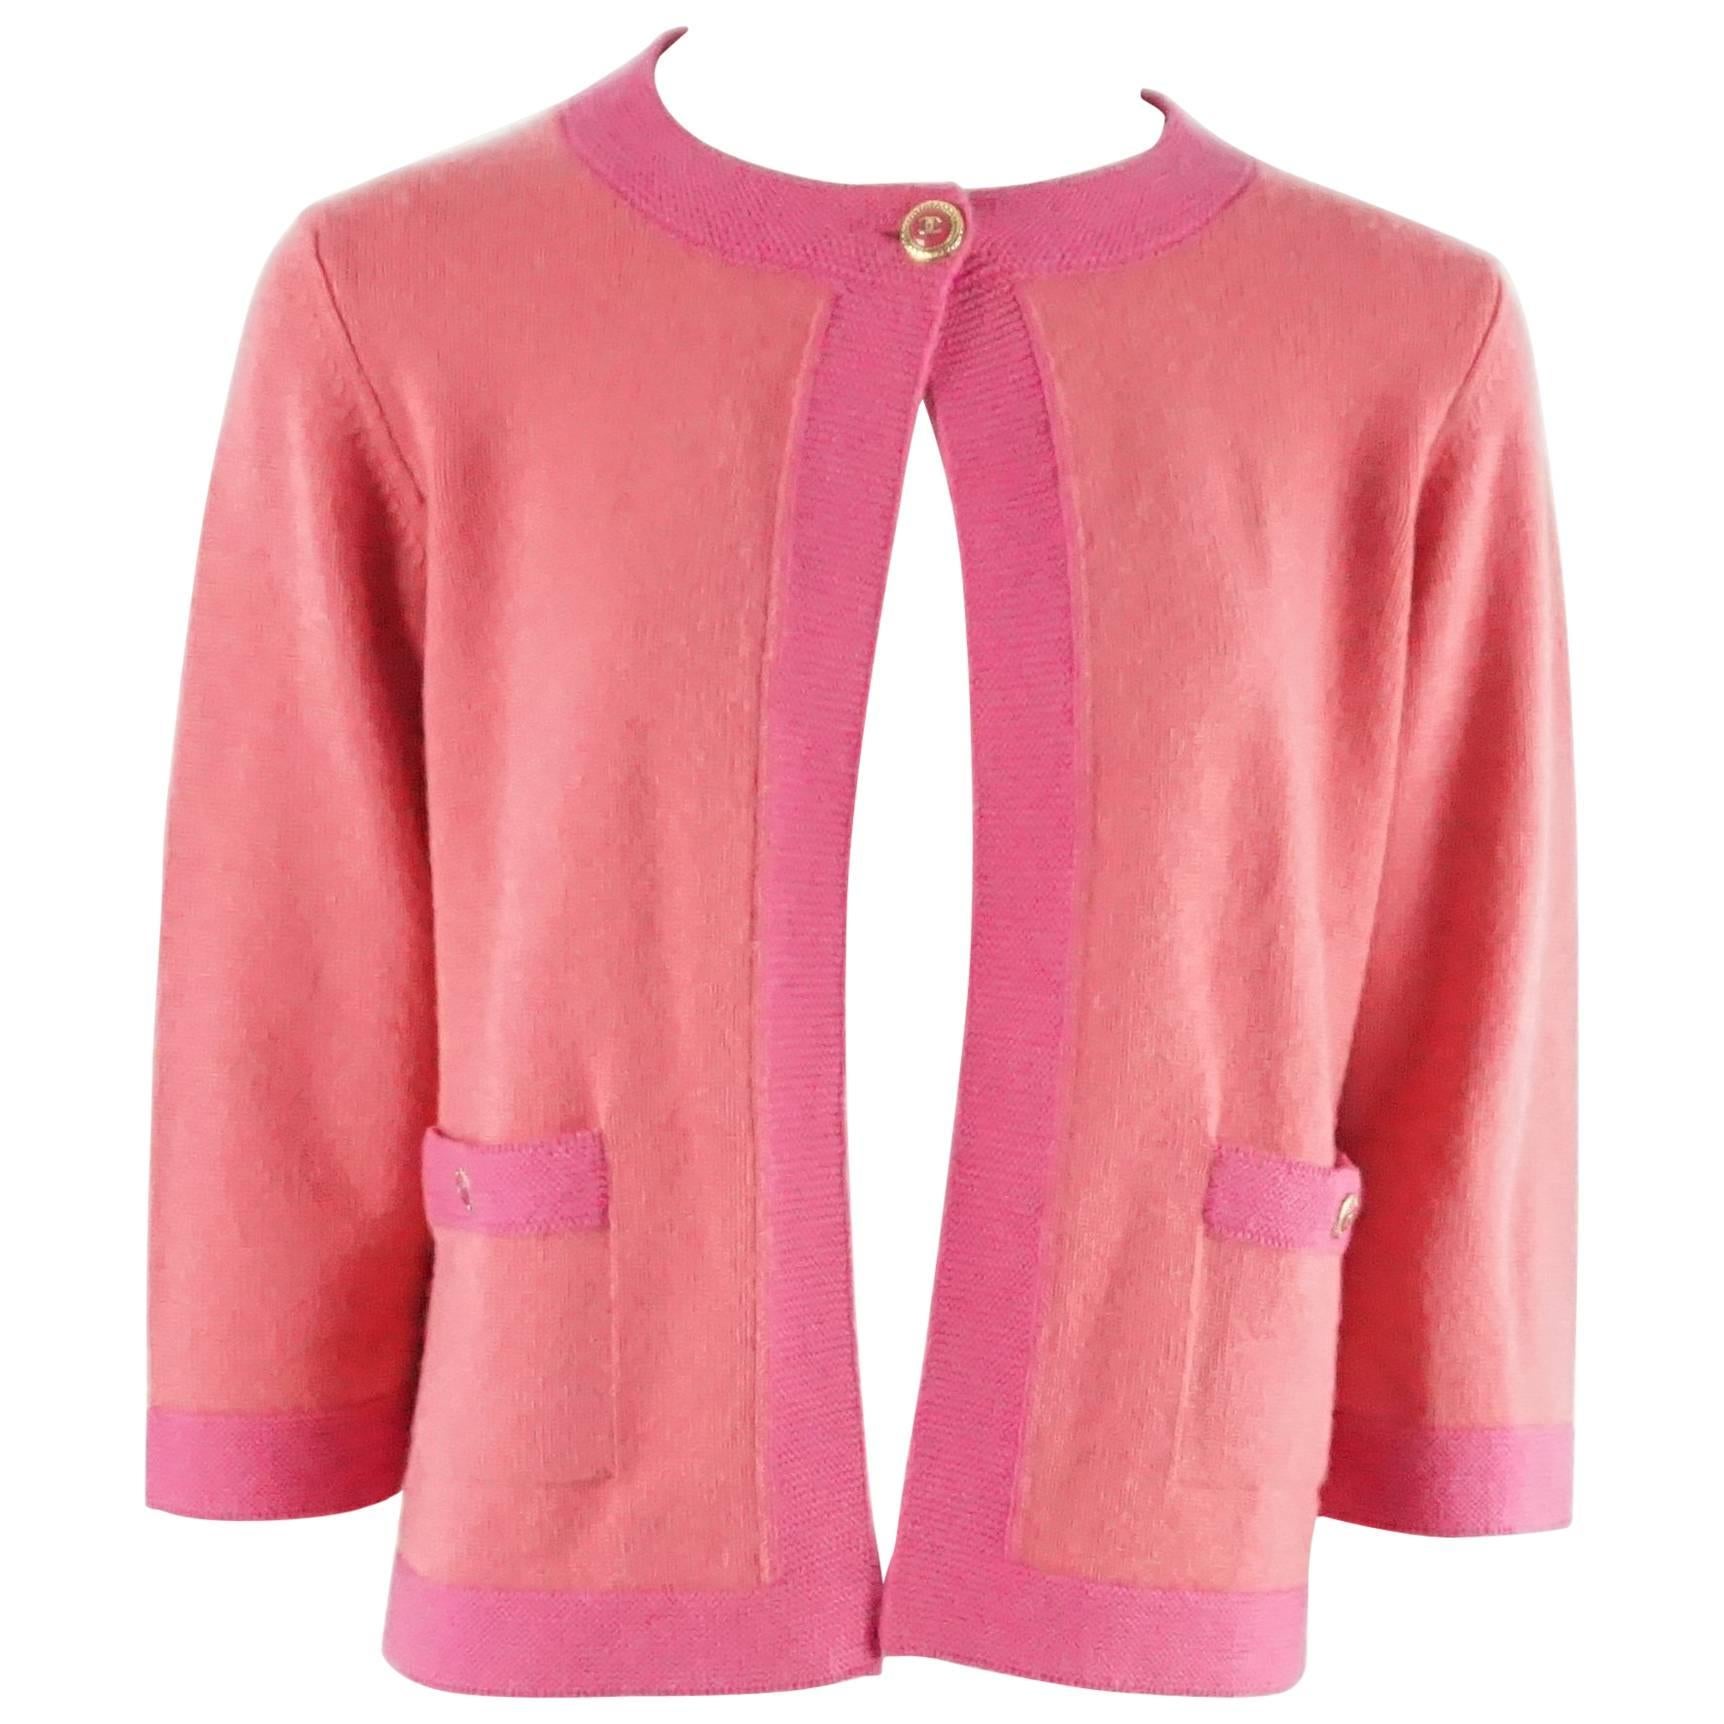 Chanel Salmon and Pink Trim Cashmere Sweater - 42 - 07P